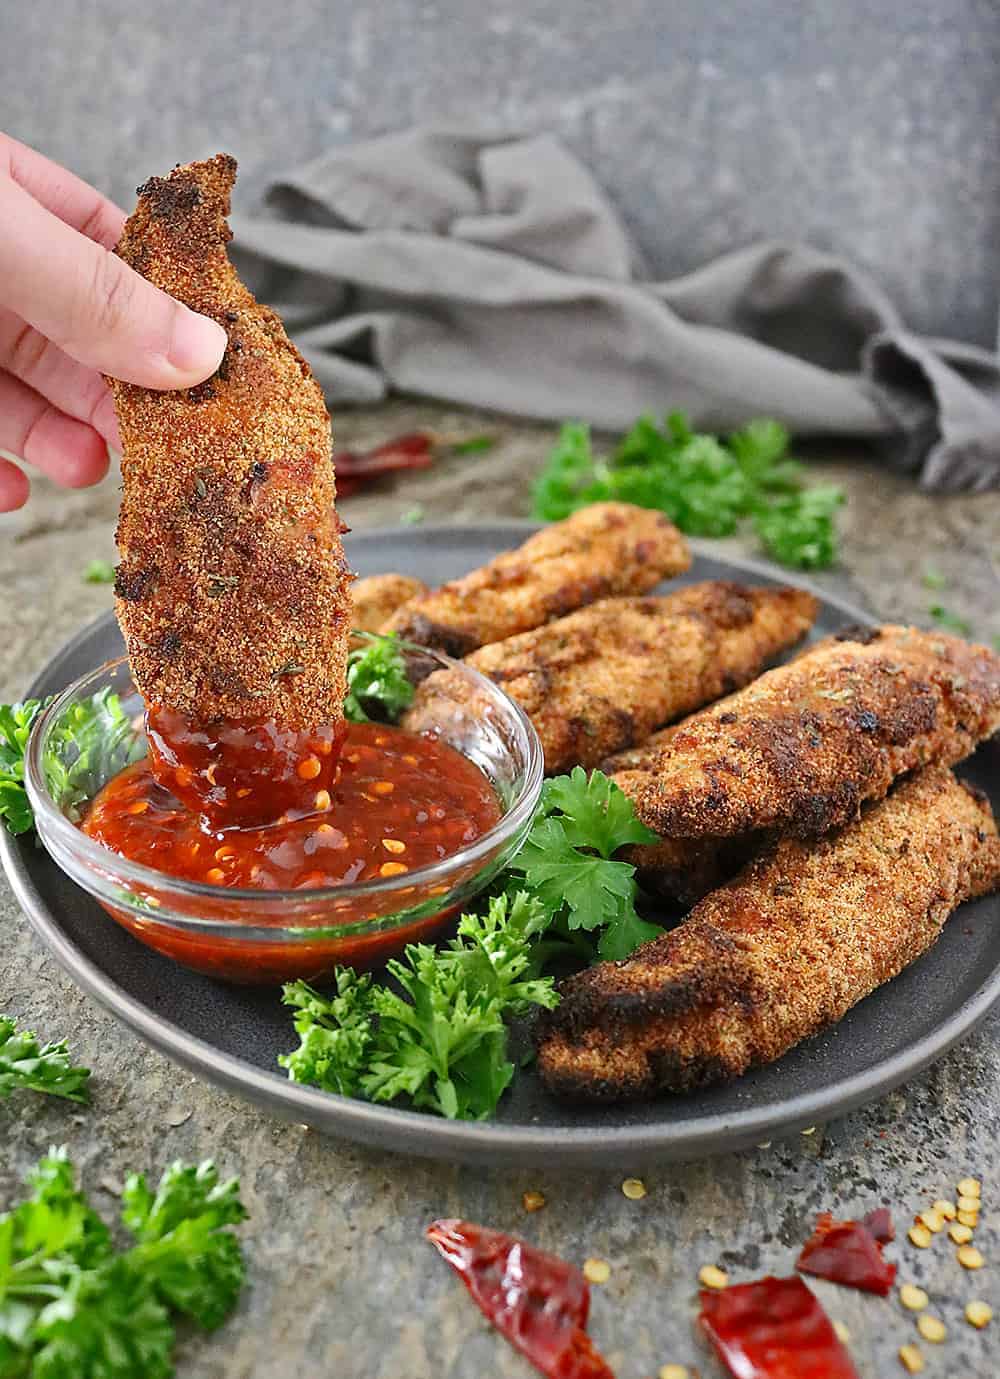 You've gotta whip up a batch of these Delicious Easy Sweet Spicy Air Fryer Chicken Tenders for your next get together!